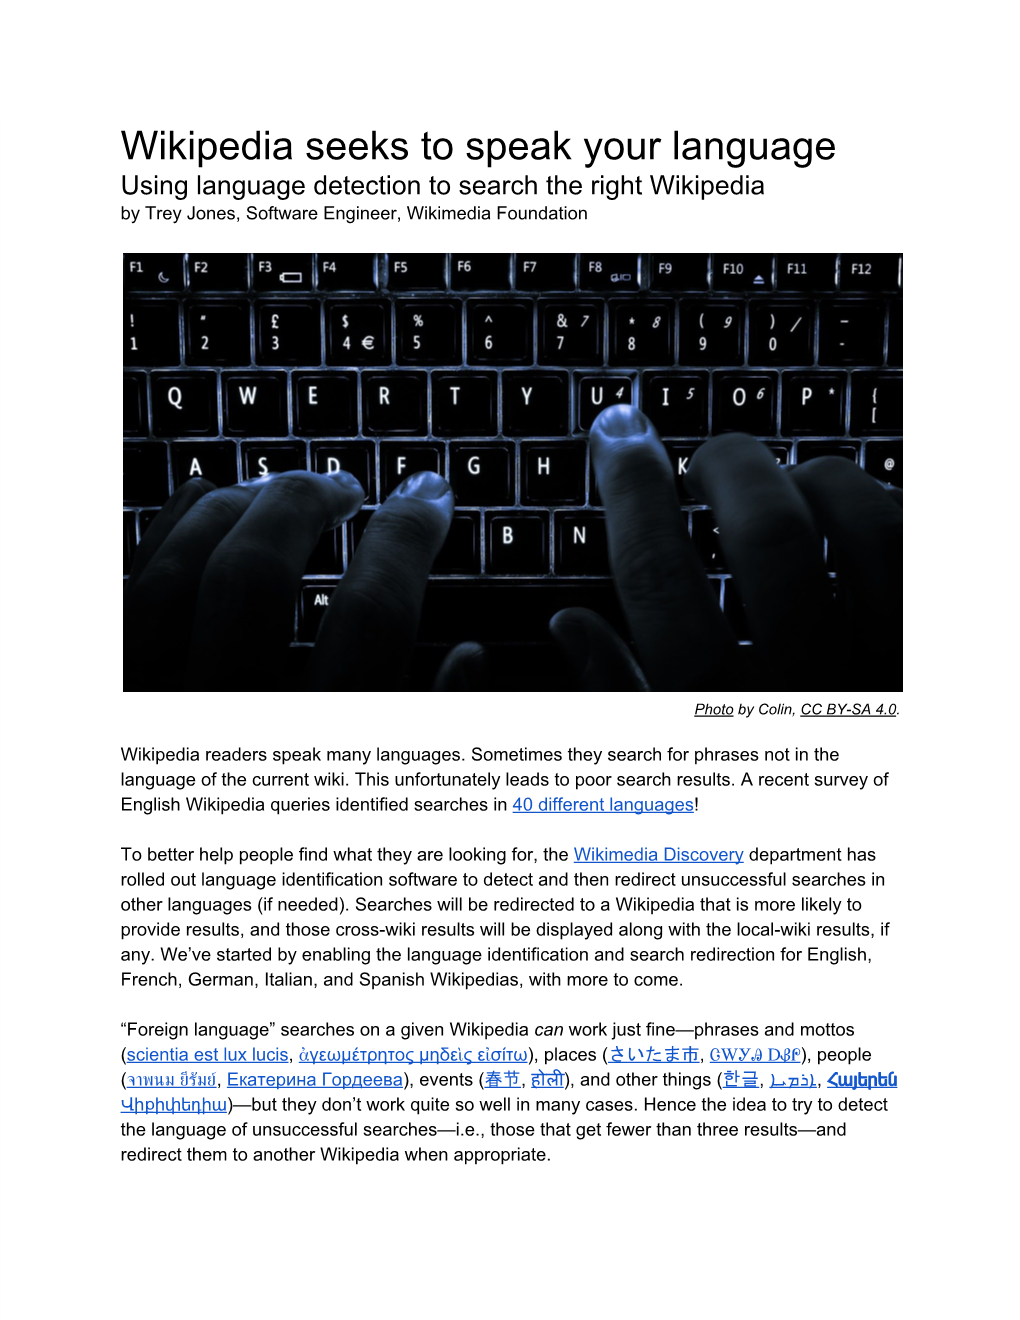 Wikipedia Seeks to Speak Your Language Using Language Detection to Search the Right Wikipedia by Trey Jones, Software Engineer, Wikimedia Foundation